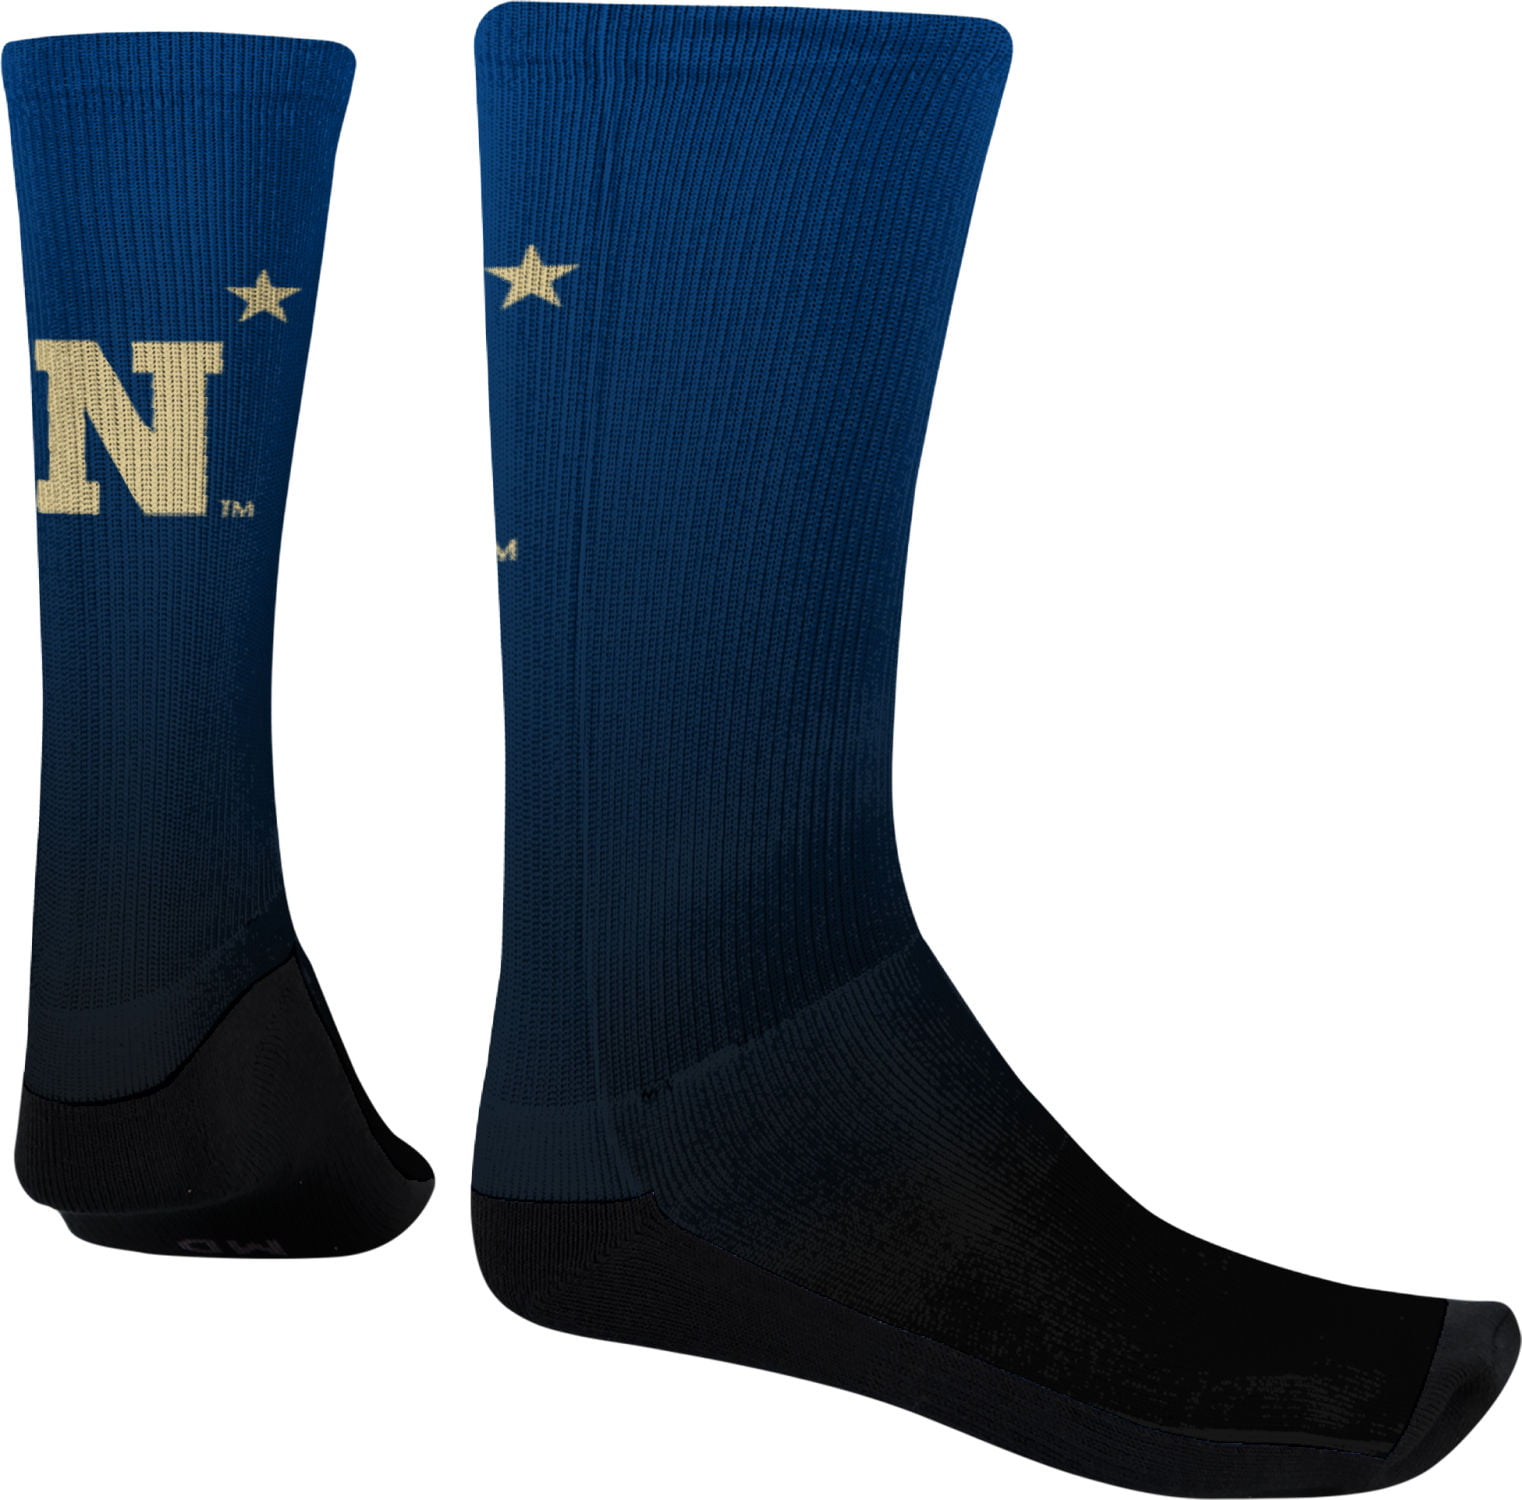 Men's United States Naval Academy Fade 